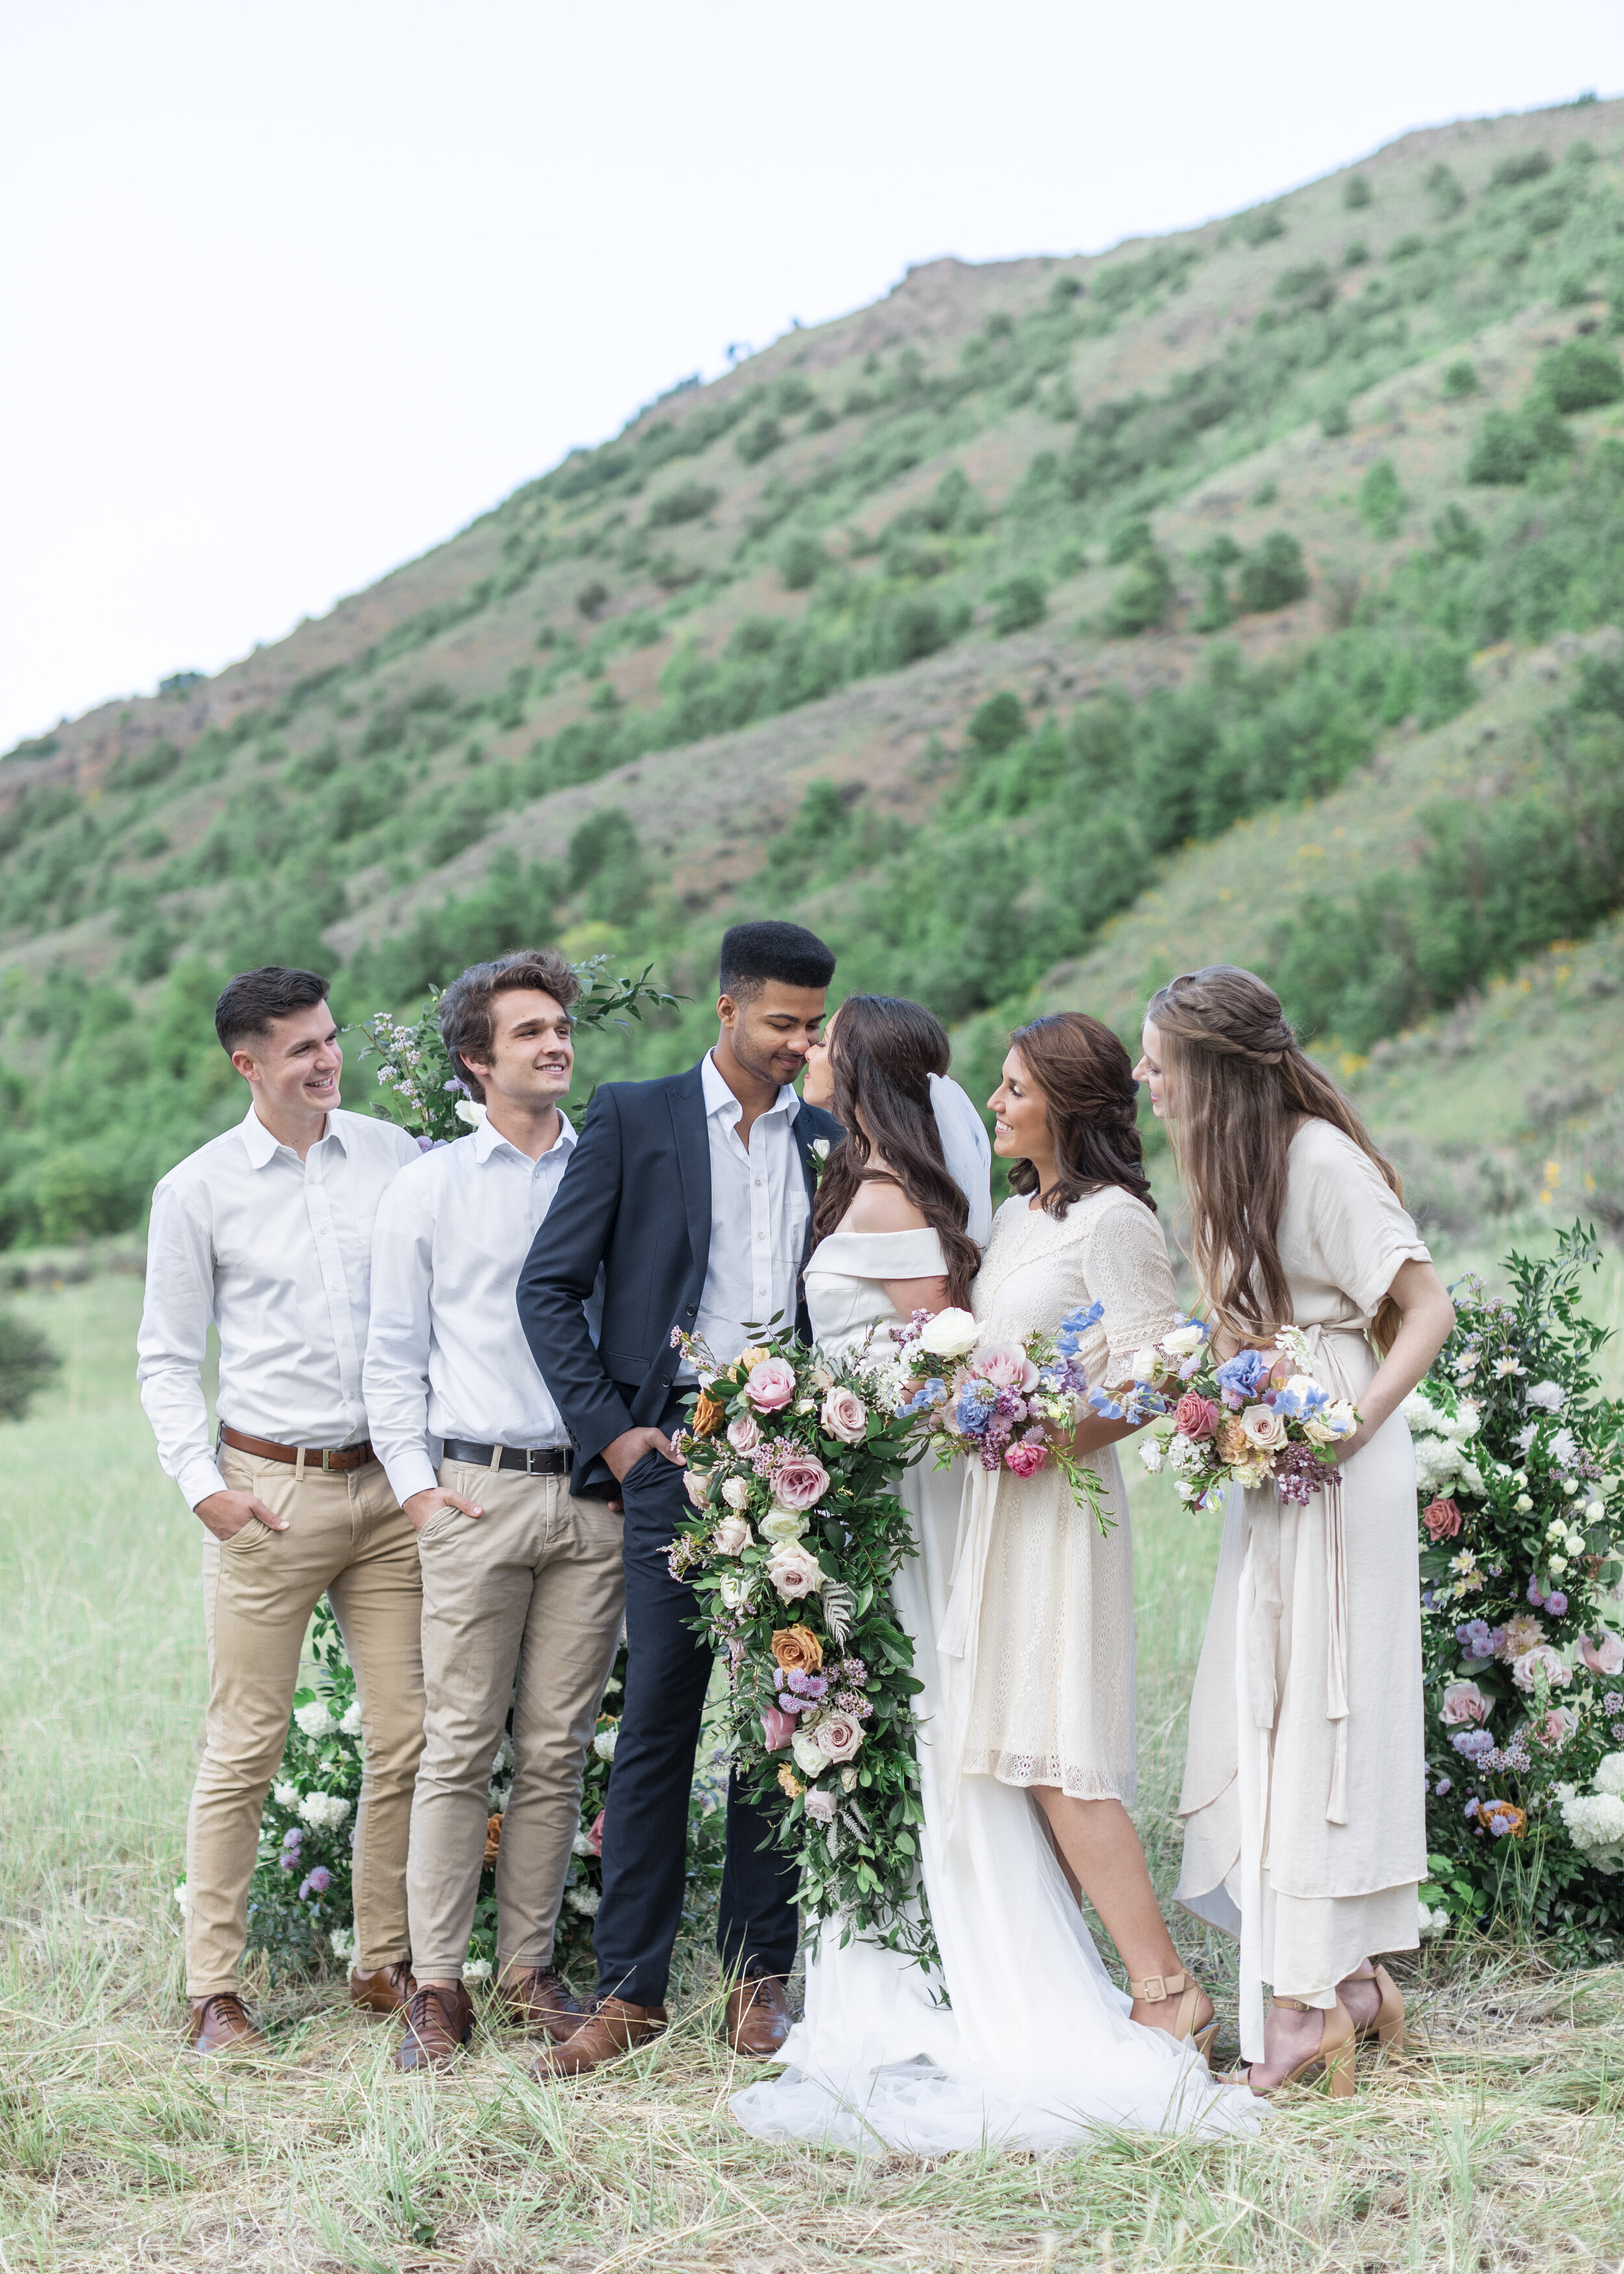  Clarity Lane teaches and allows photography clients hands-on experience during a workshop in Logan featuring a wedding party. wedding party photography wedding day photo ideas #claritylanephotography #claritylaneweddings #claritylaneworkshop #weddin